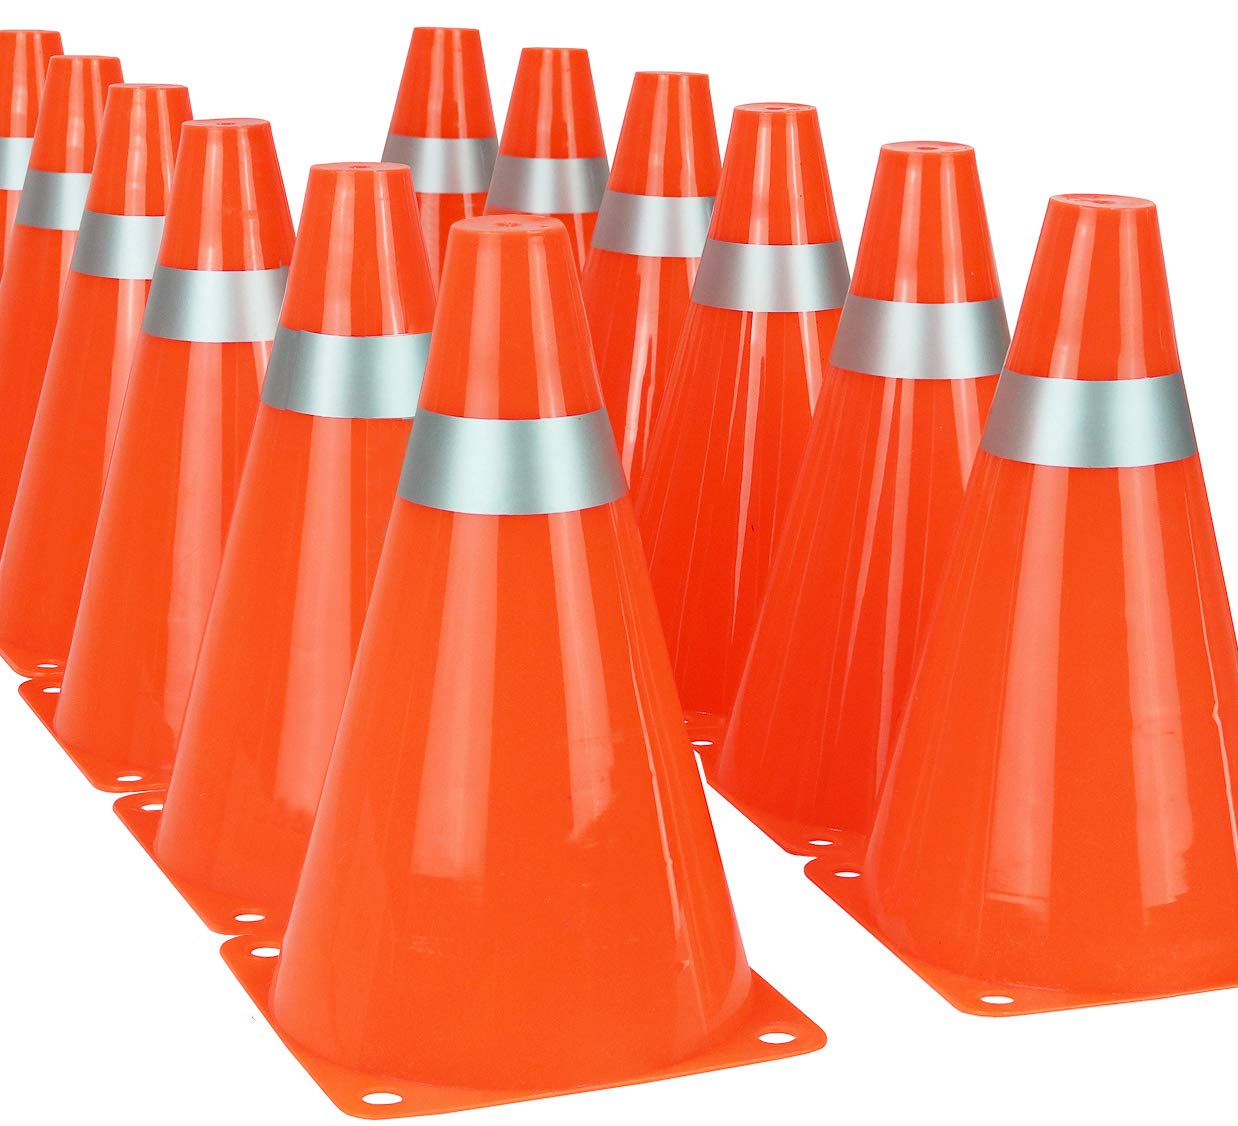 7 Inch Traffic Cones Sports Soccer Drills Agility Training Orange Cones for Kids - Opticdeals